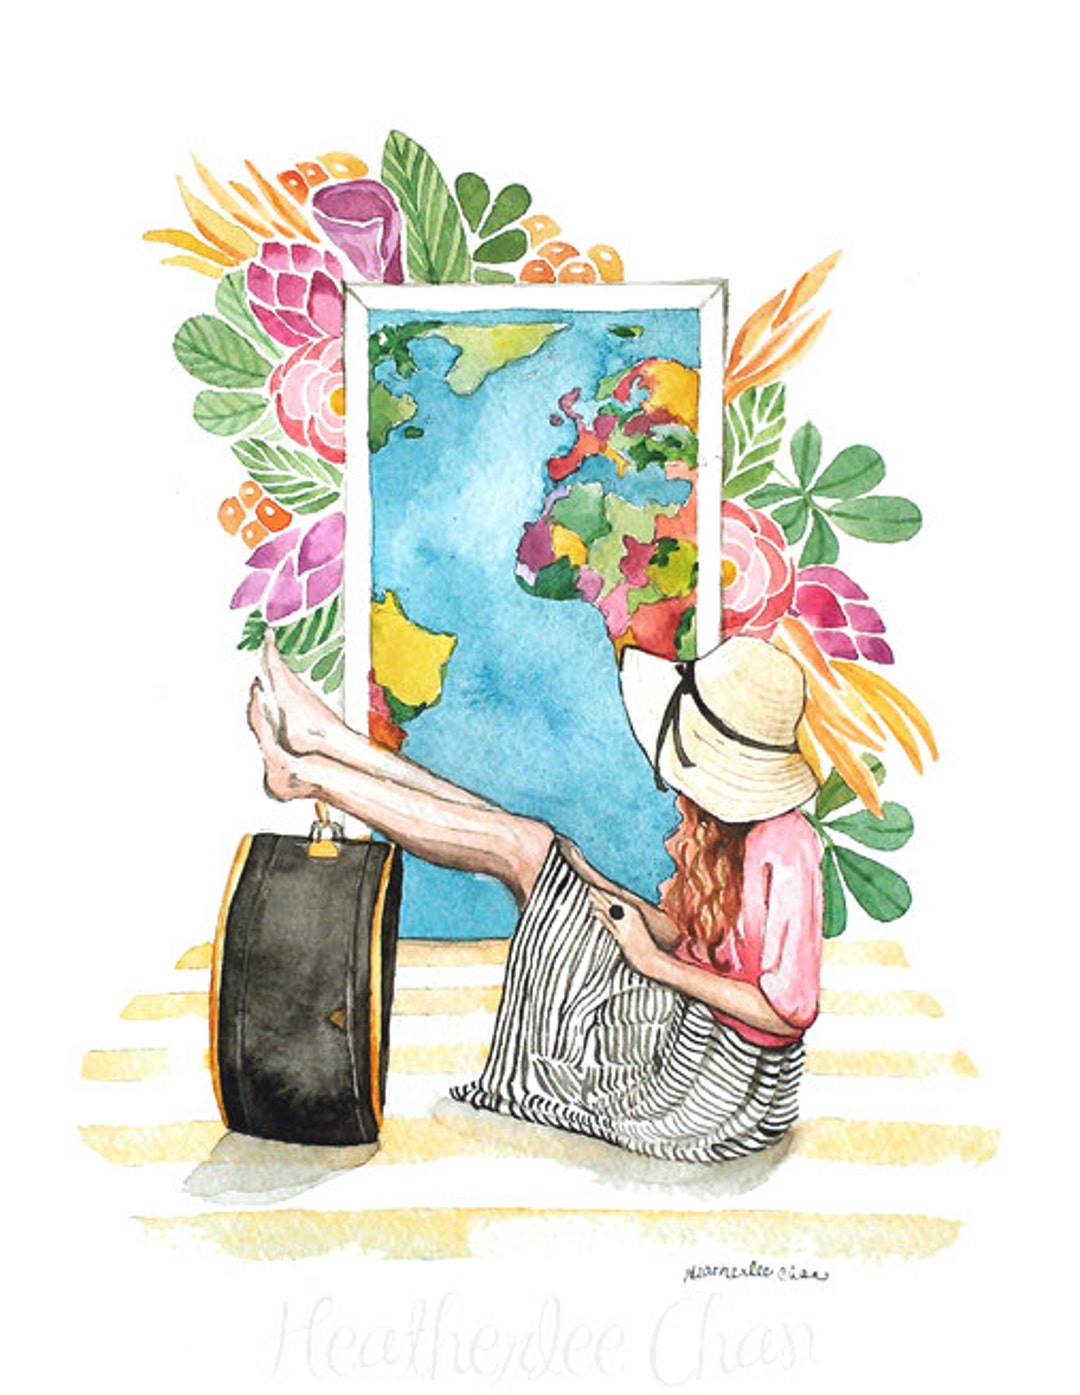 The Reader and the Tree Library Watercolor Art Print 